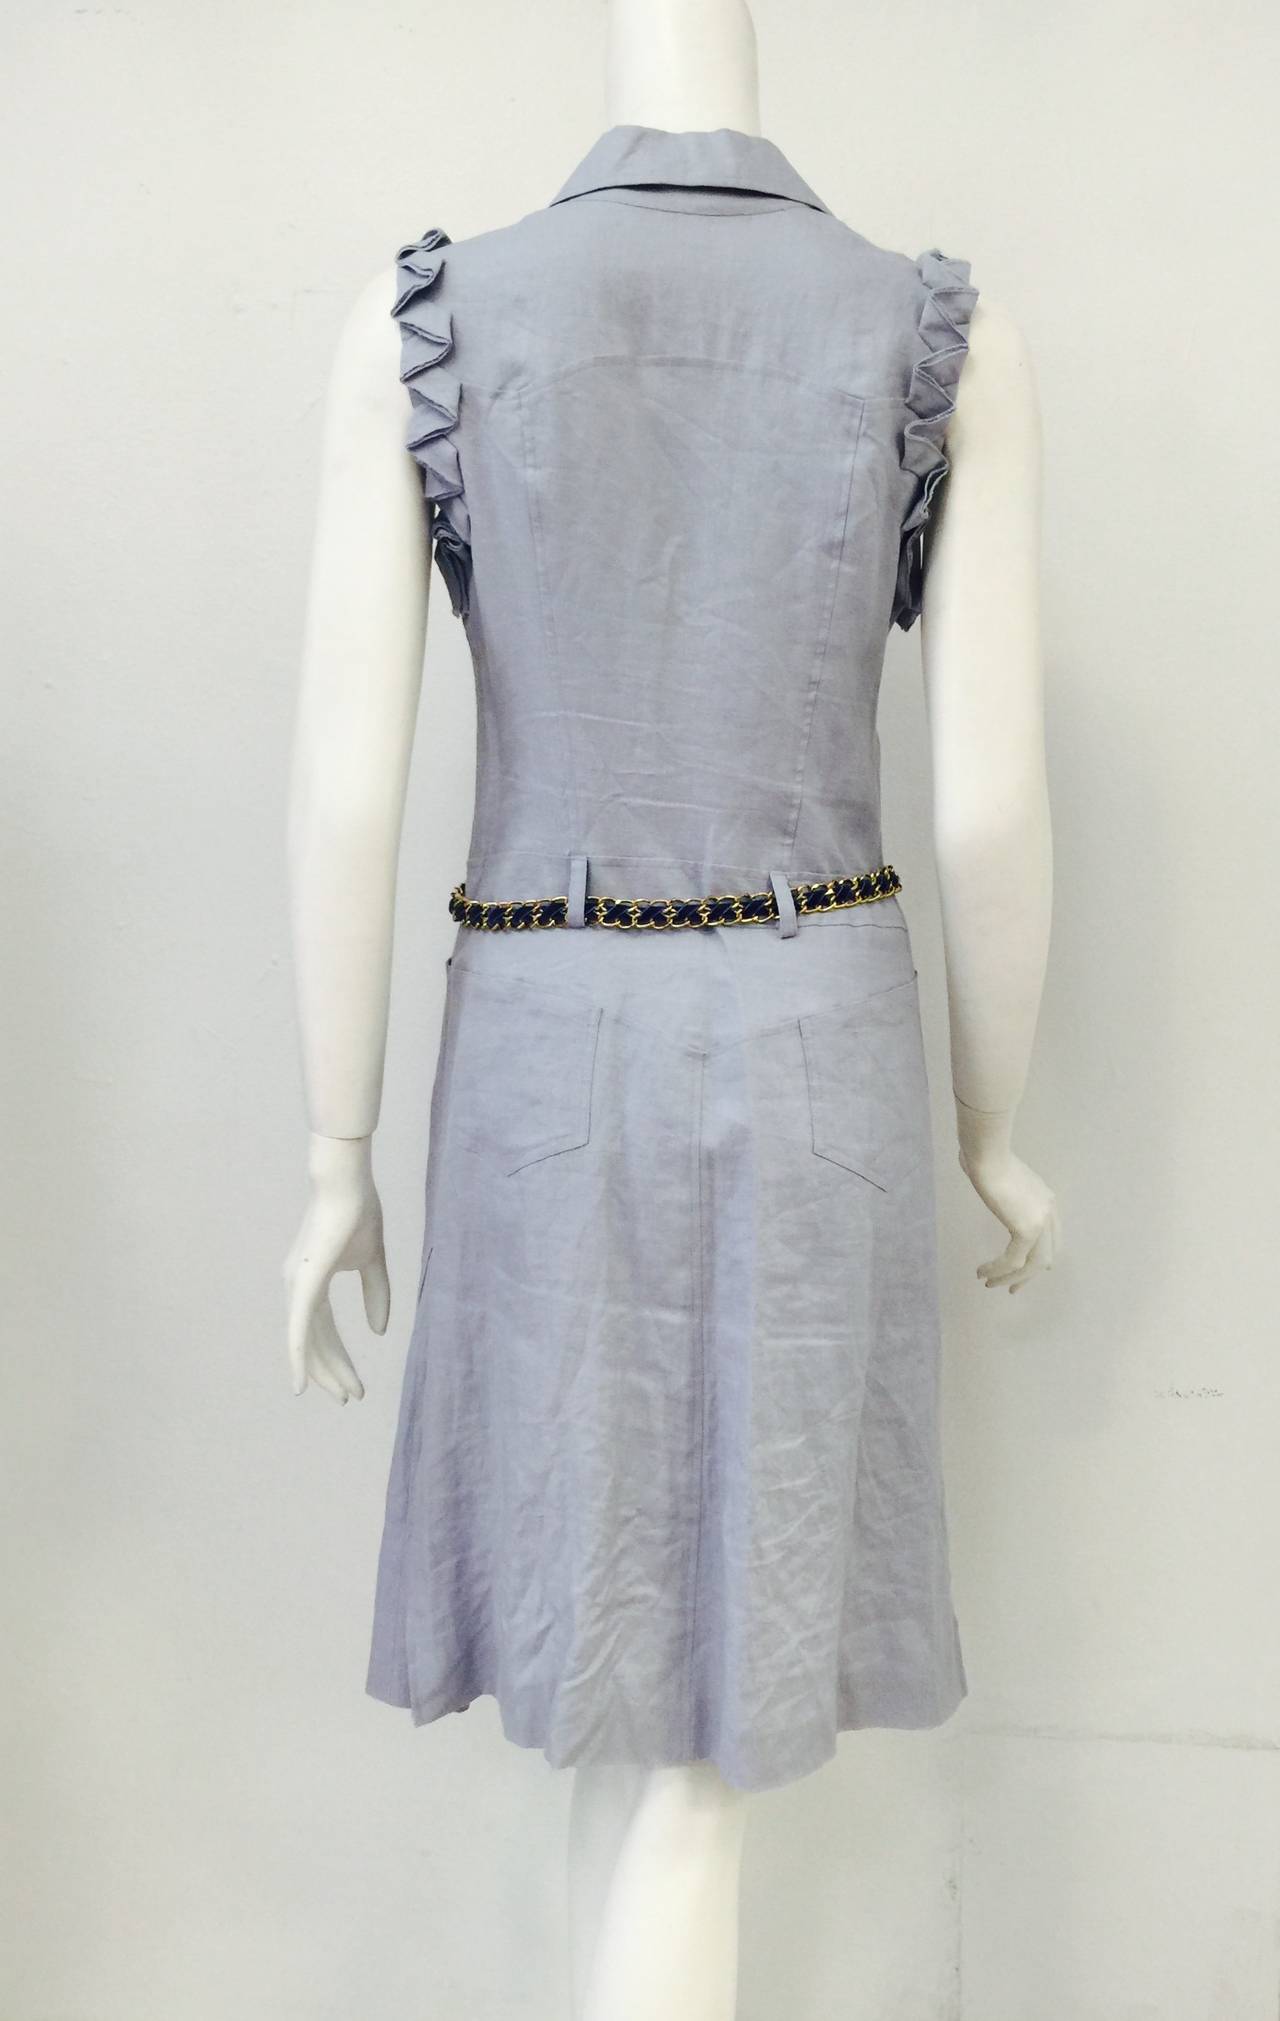 Powder Blue 100% Linen Day Dress proves that Valentino is much more than Red Carpet!  Features ultra-luxurious 100% linen fabric, sleeveless design, and dropped waist, a-line, silhouette.  Seven pockets!  Two flap breast pockets complement the